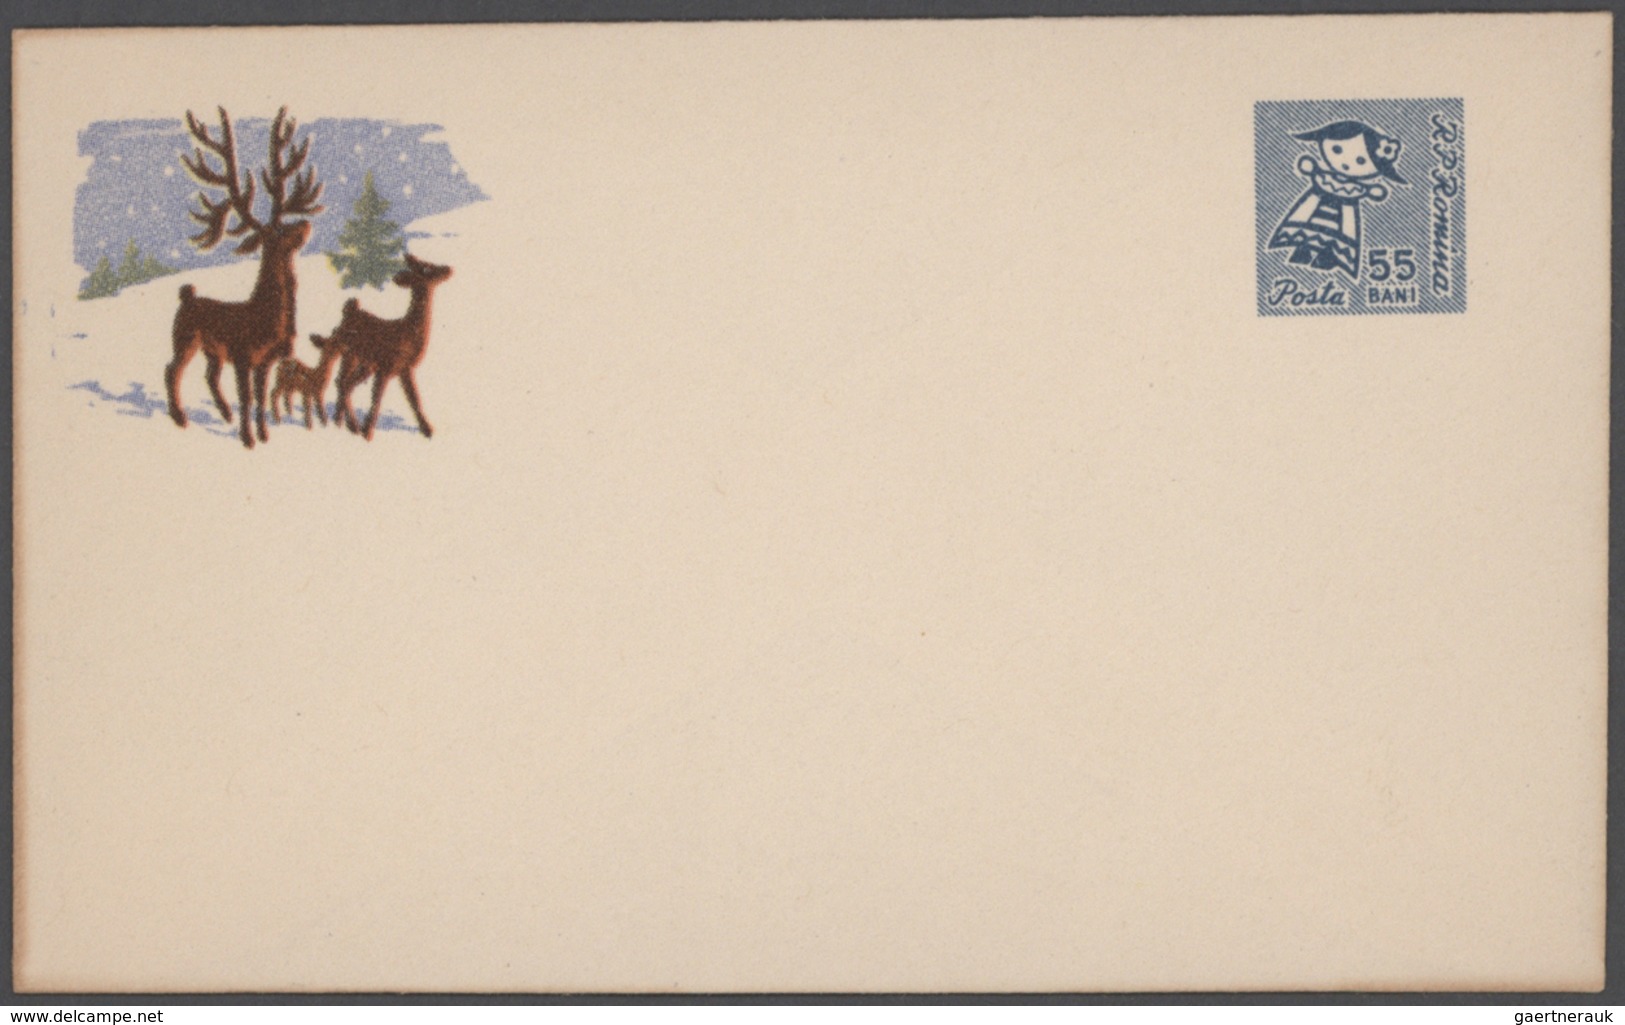 Rumänien - Ganzsachen: 1960/2002 holding of ca. 1.290 unused picture postal stationery cards and env